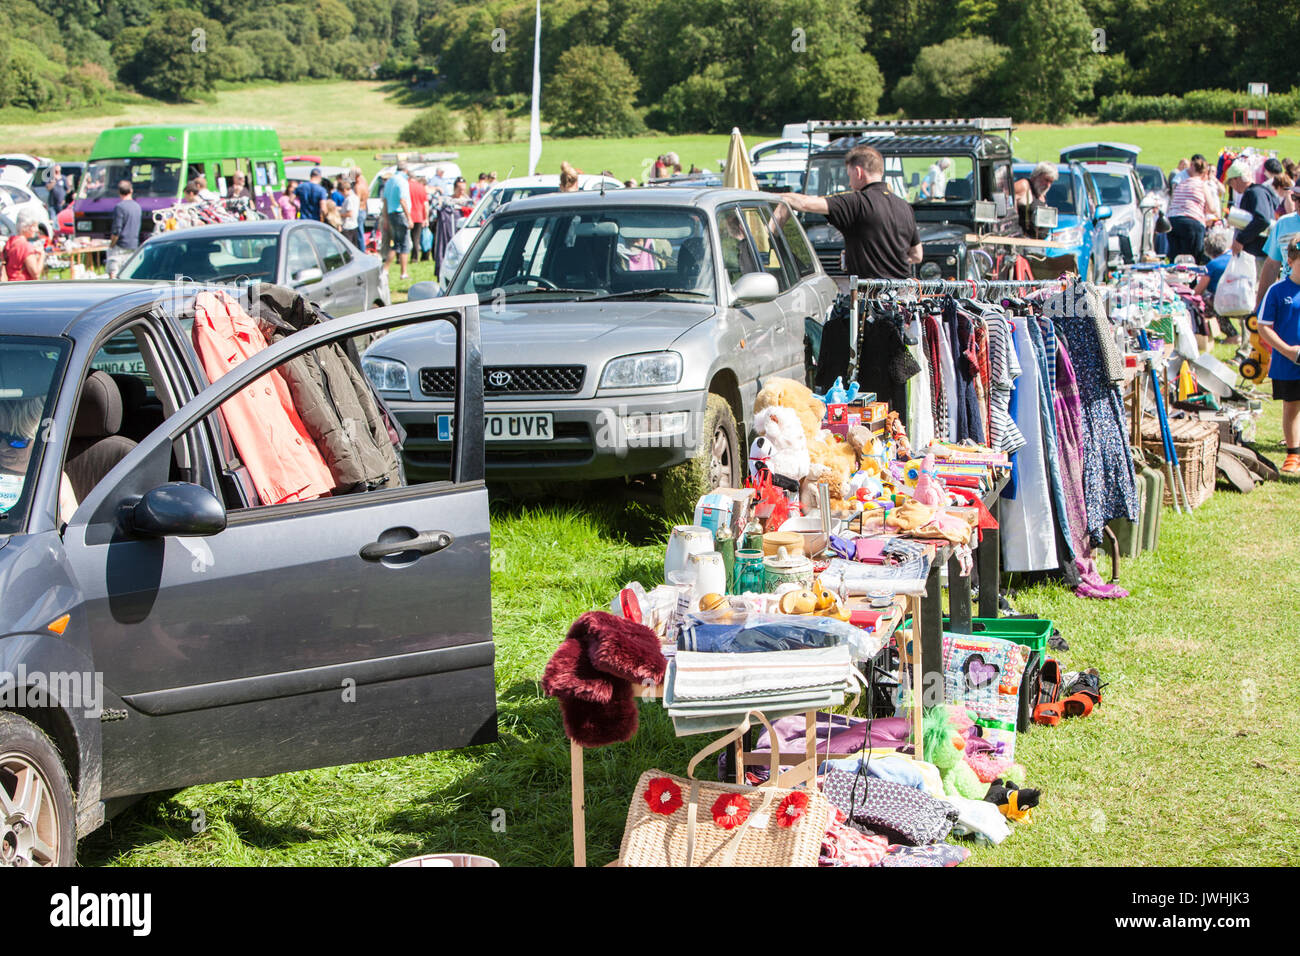 Tre'r-ddol village,Ceredigion, Wales, UK. 13th August, 2017. Sunday car boot sale.Popular with tourists to the coastal area and locals. Held in the village of Tre'r-ddol,between Machynlleth and Aberystwyth,Ceredigion,Mid,Wales,U.K.,Europe. Credit: Paul Quayle/Alamy Live News Stock Photo